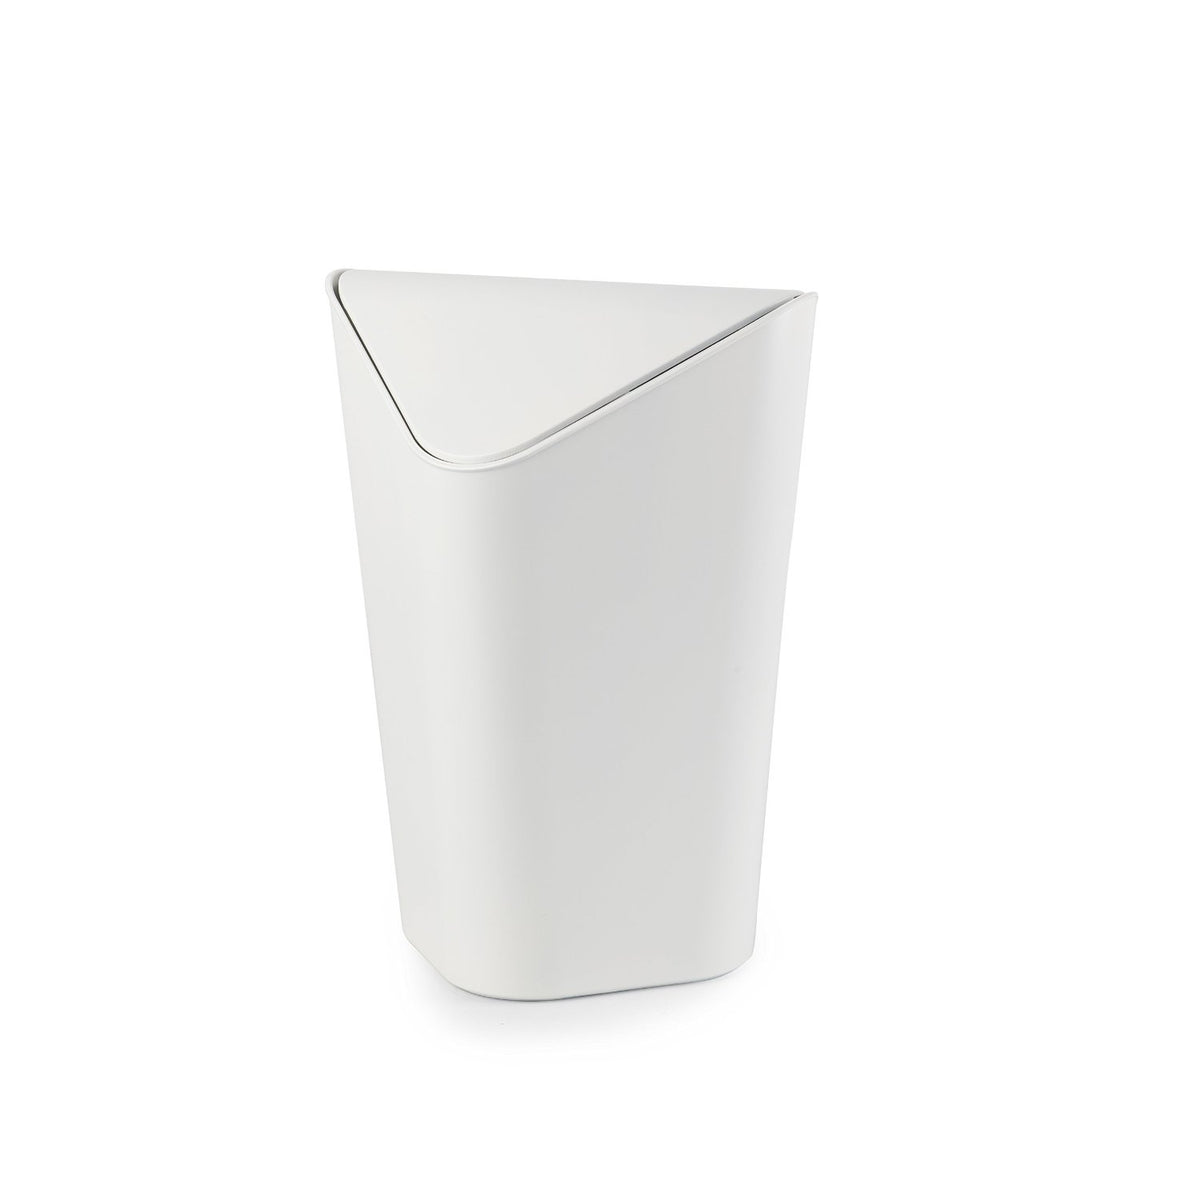 Buy umbra corner waste can - Online store for trash & recycling, trash cans in USA, on sale, low price, discount deals, coupon code